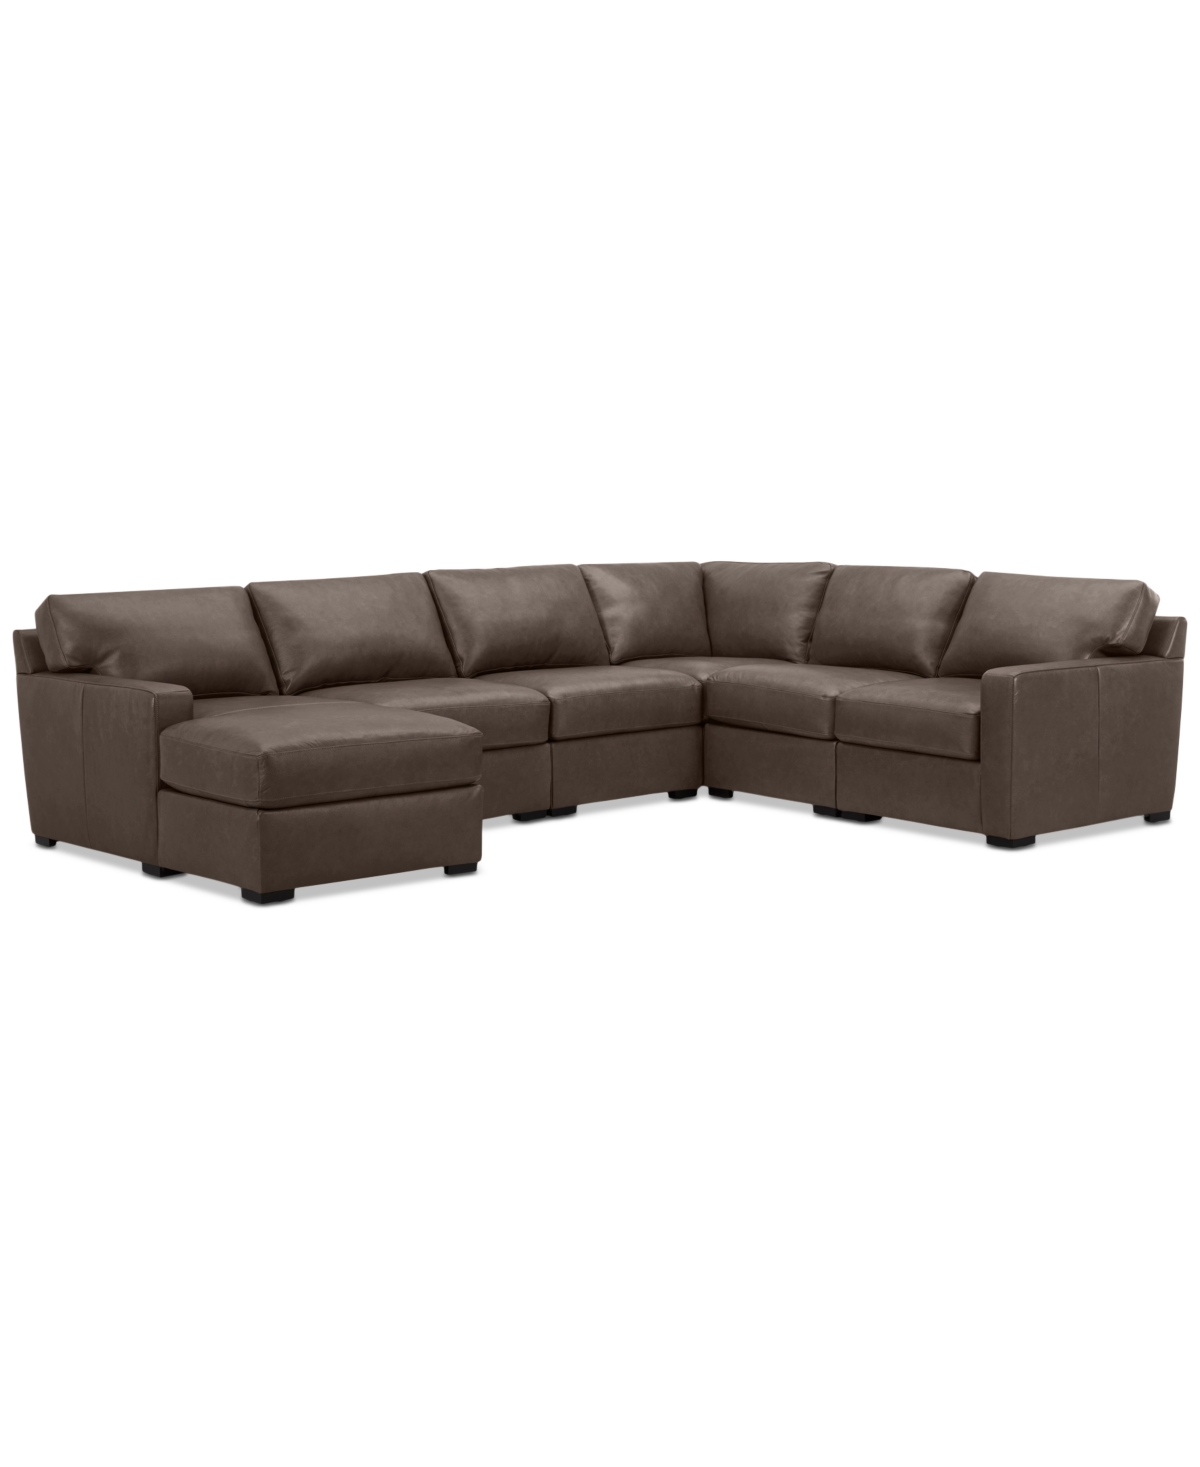 Macy's Radley 129" 6-pc. Leather Square Corner Modular Chaise Sectional, Created For  In Brown